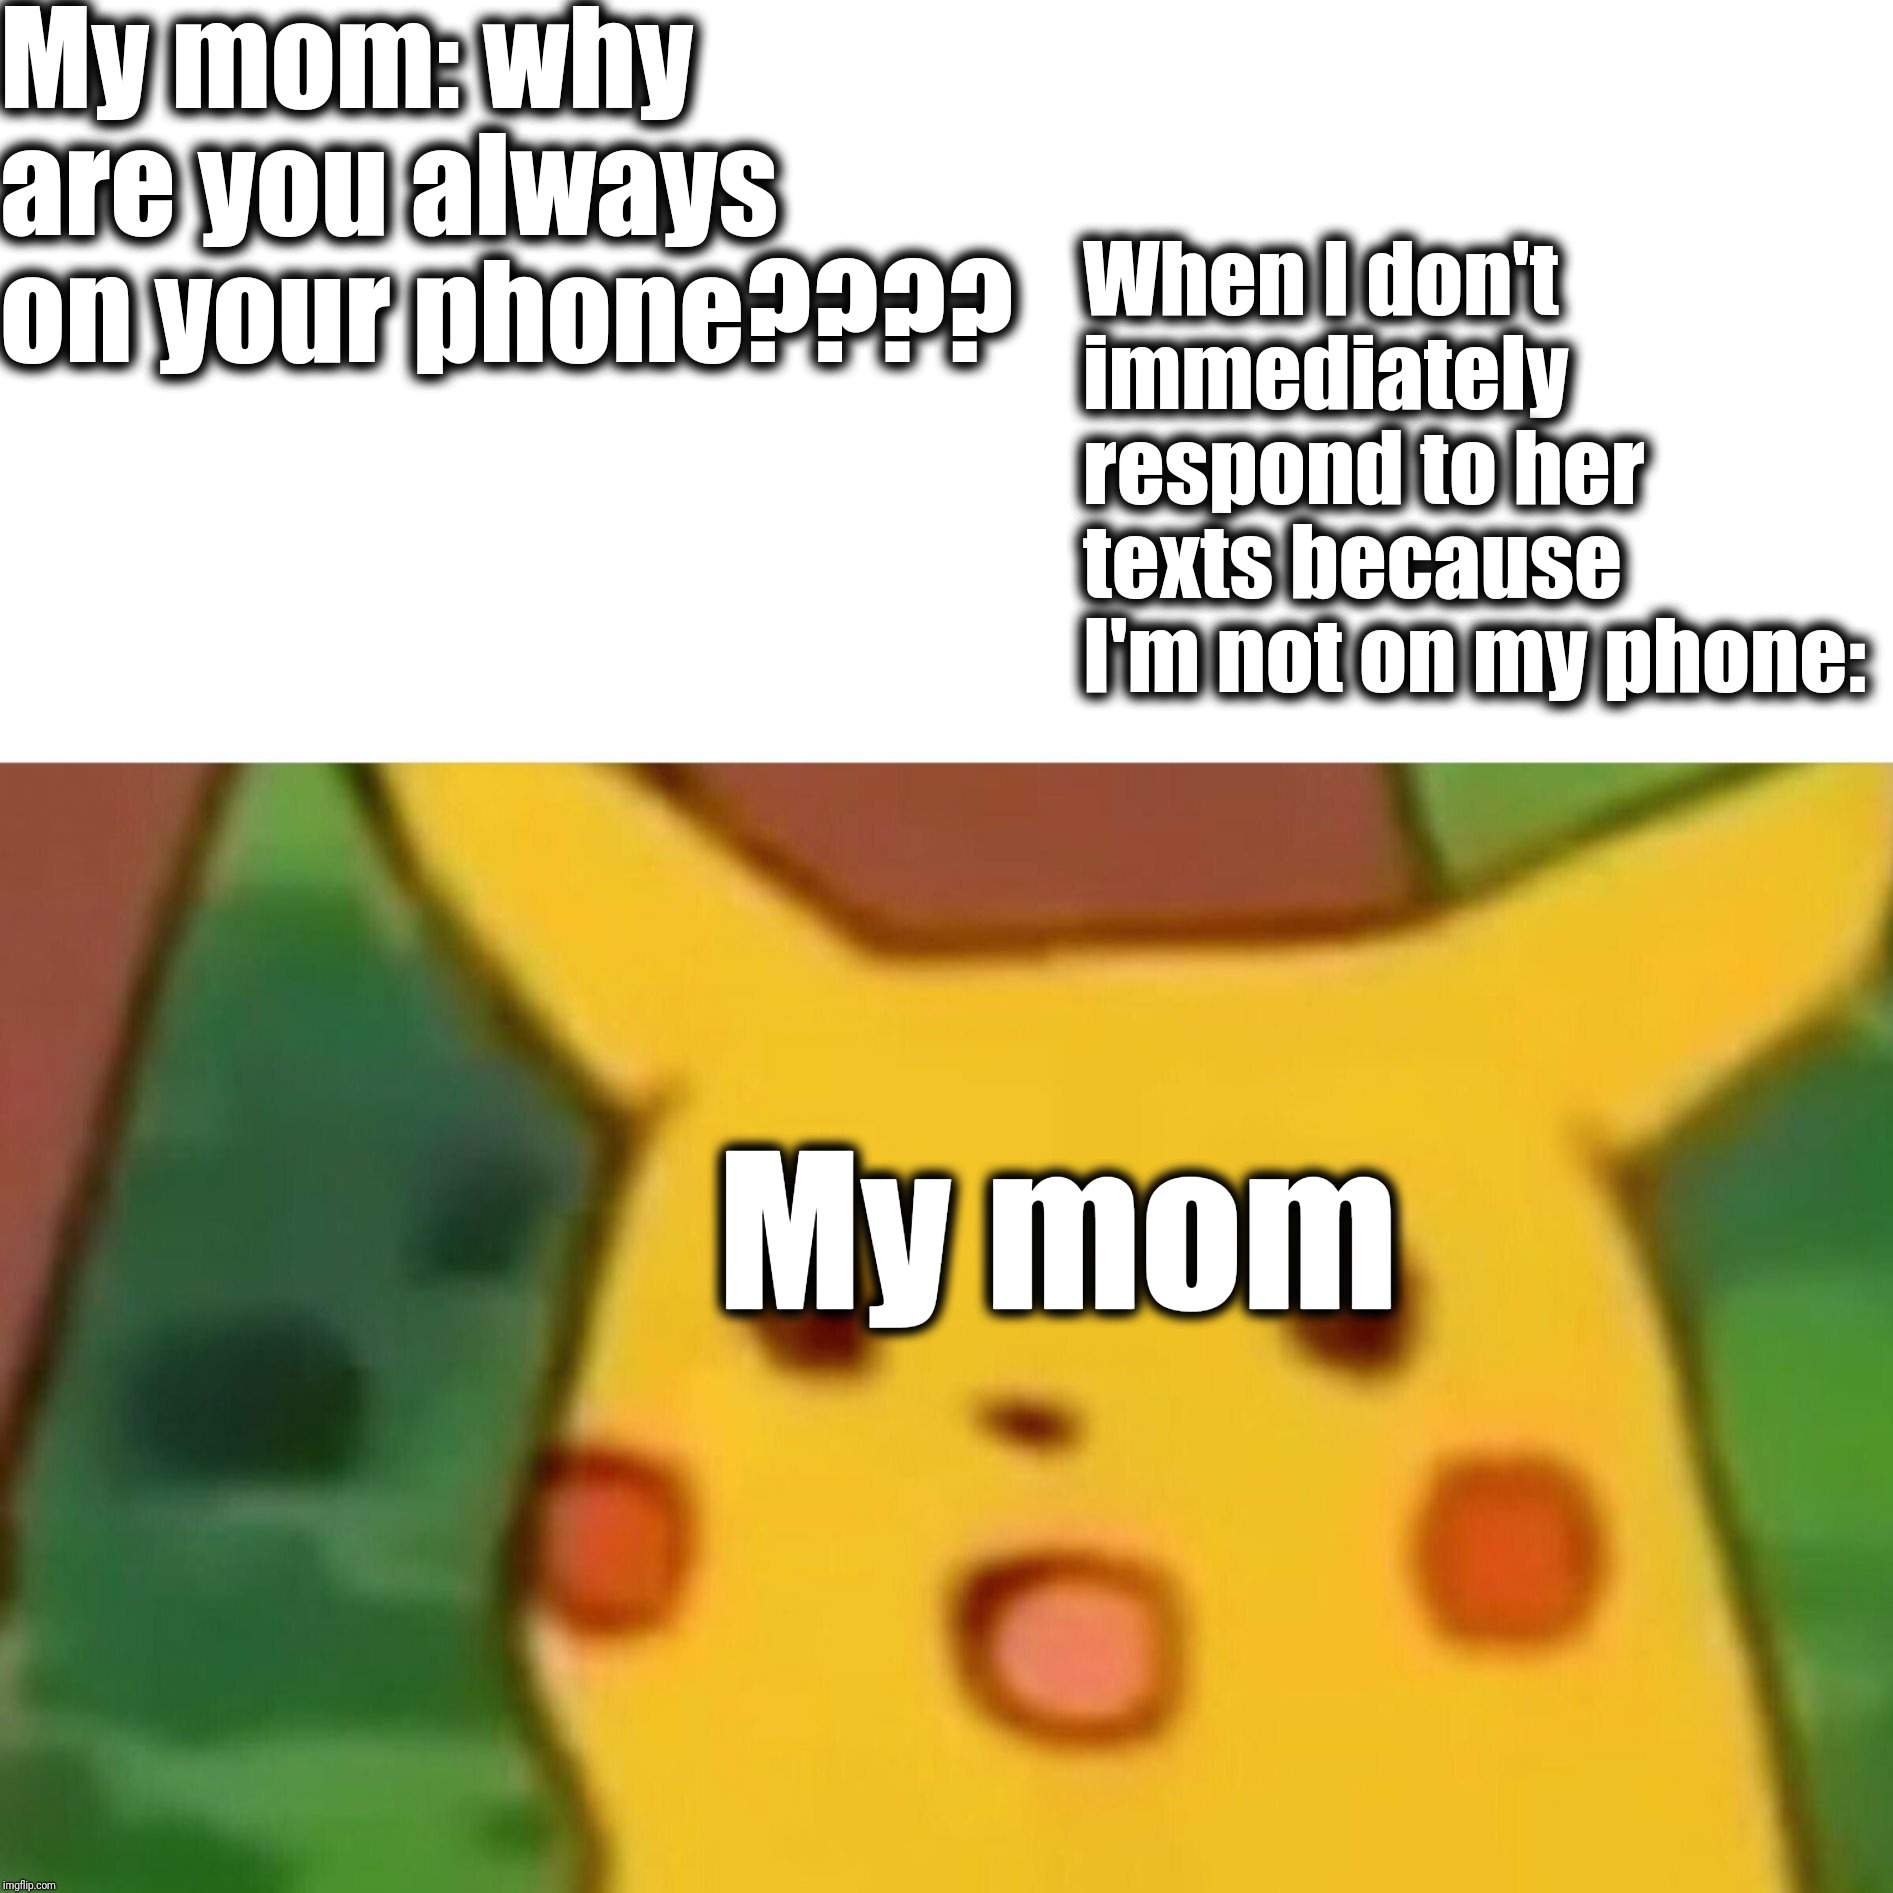 Surprised Pikachu | My mom: why are you always on your phone???? When I don't immediately respond to her texts because I'm not on my phone:; My mom | image tagged in memes,surprised pikachu | made w/ Imgflip meme maker